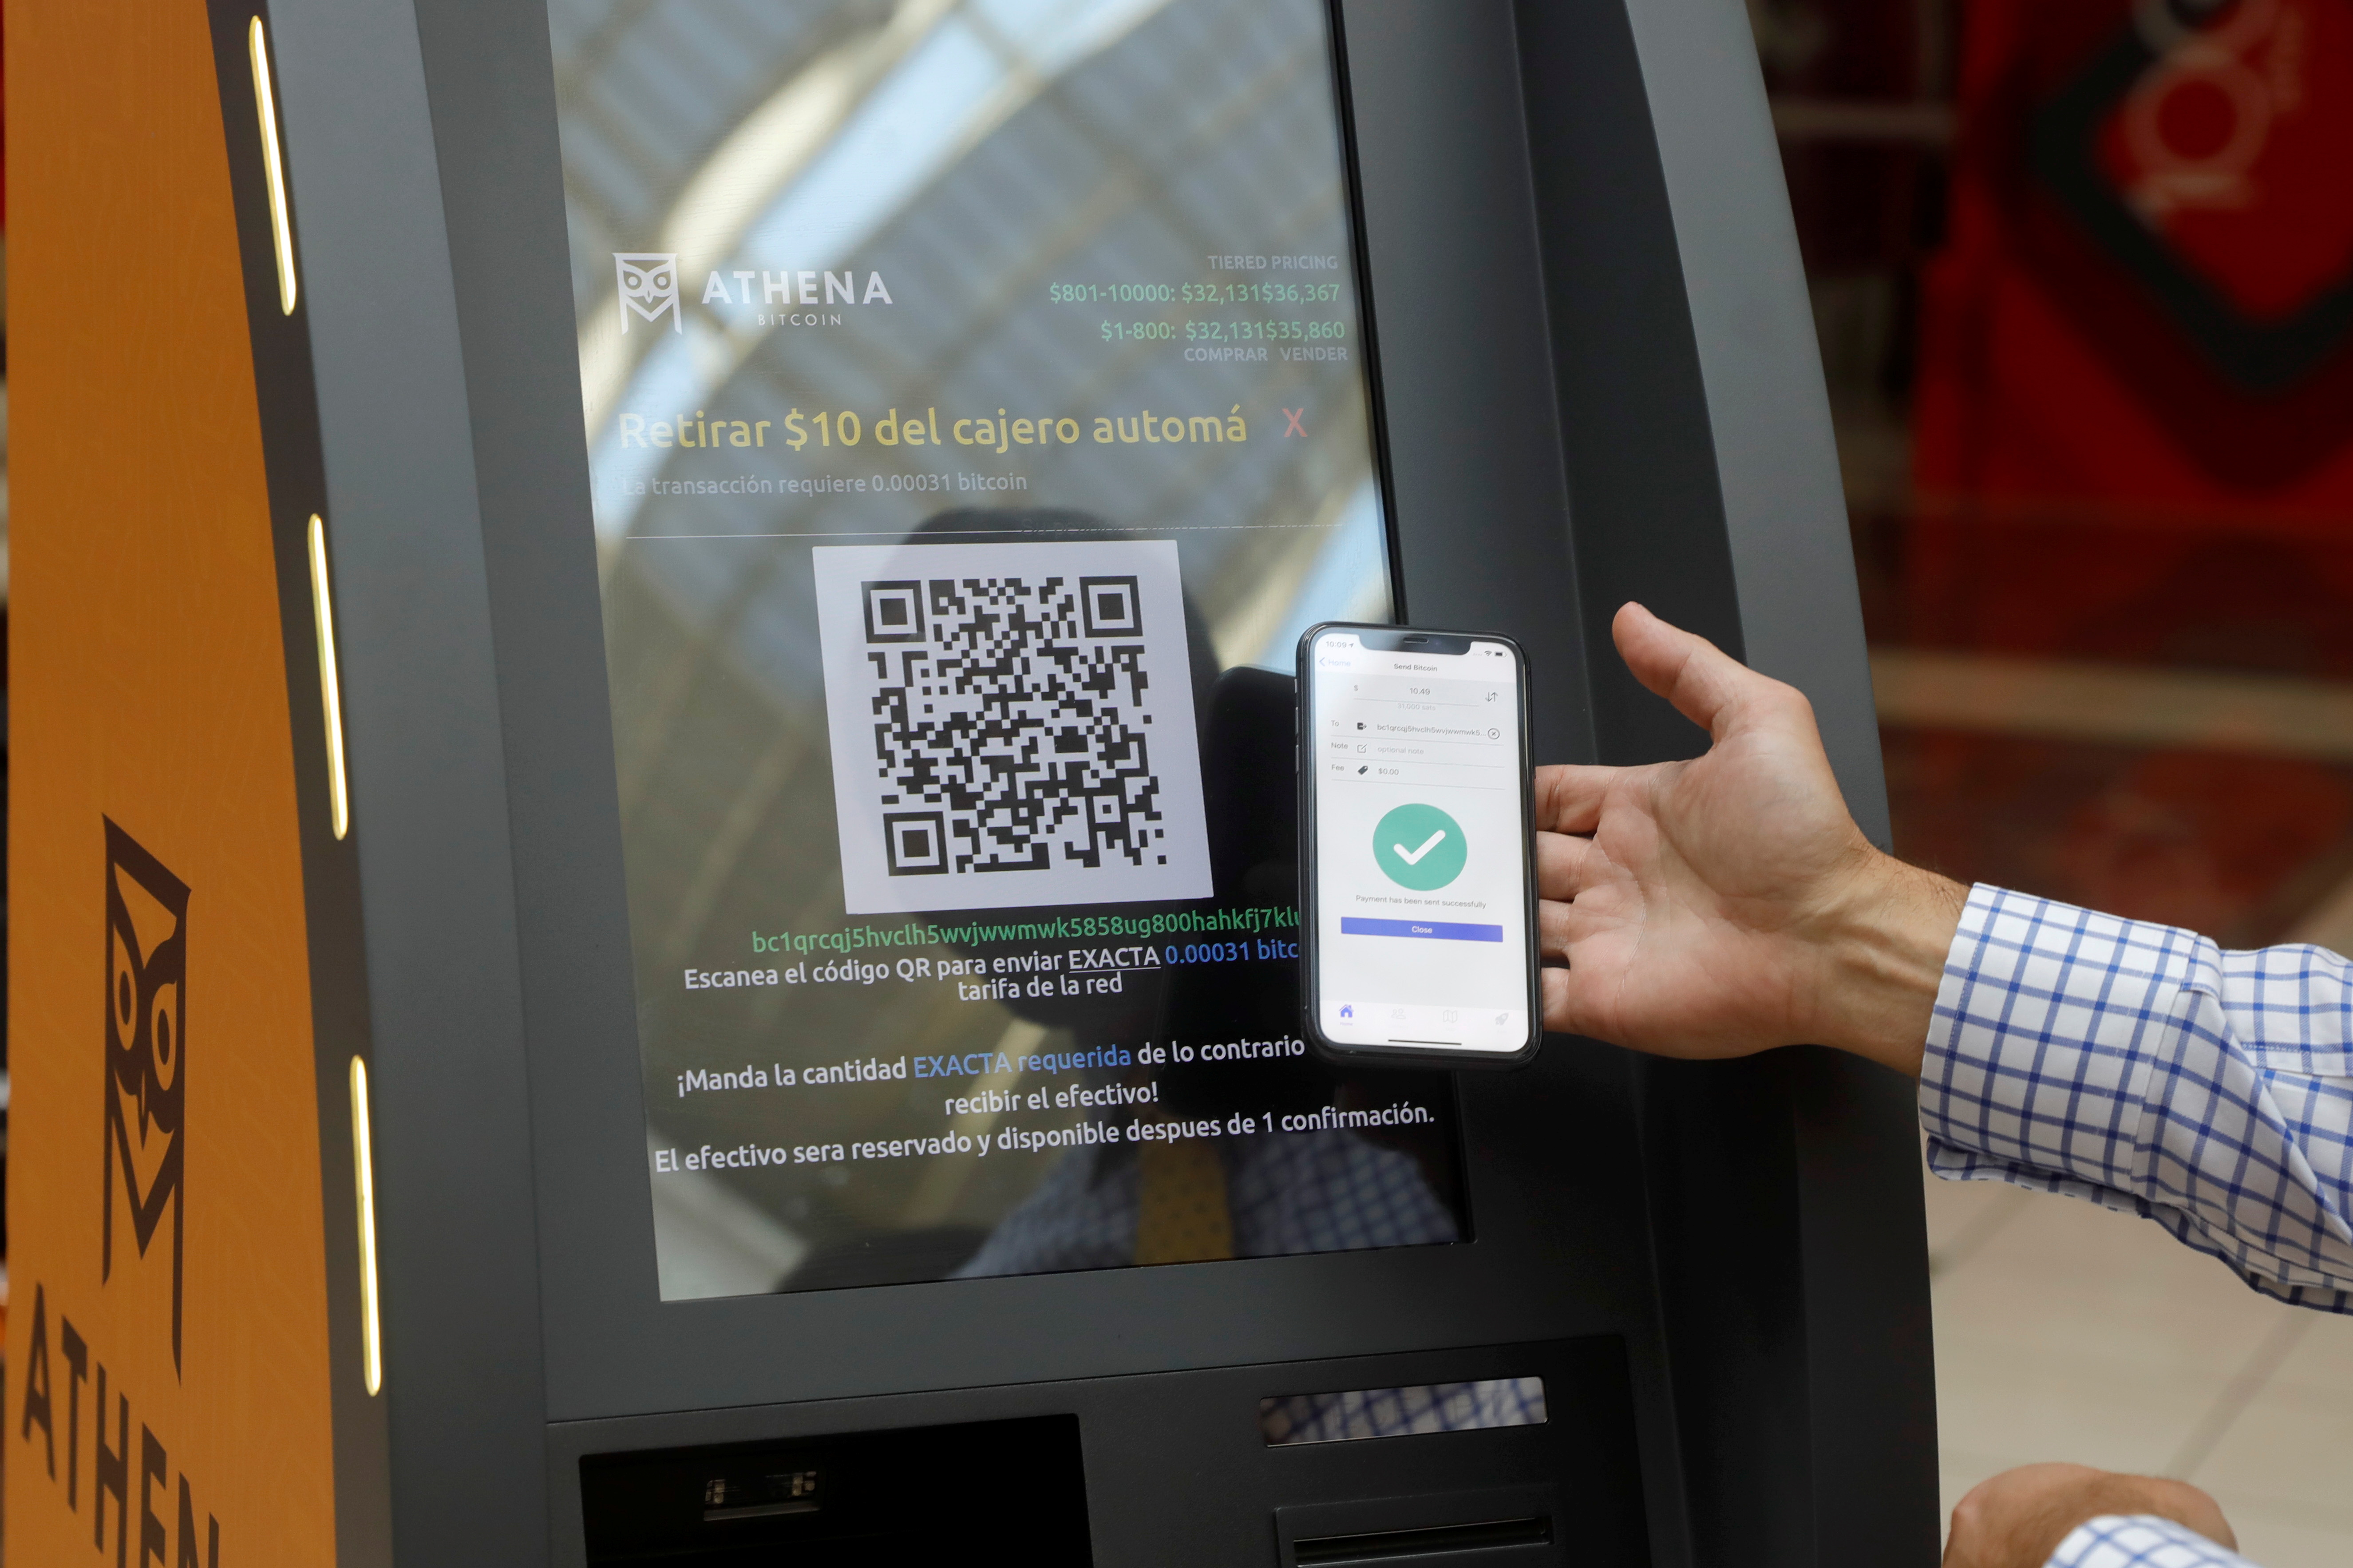 Atm bitcoin usa withdraw cash get crypto wallet